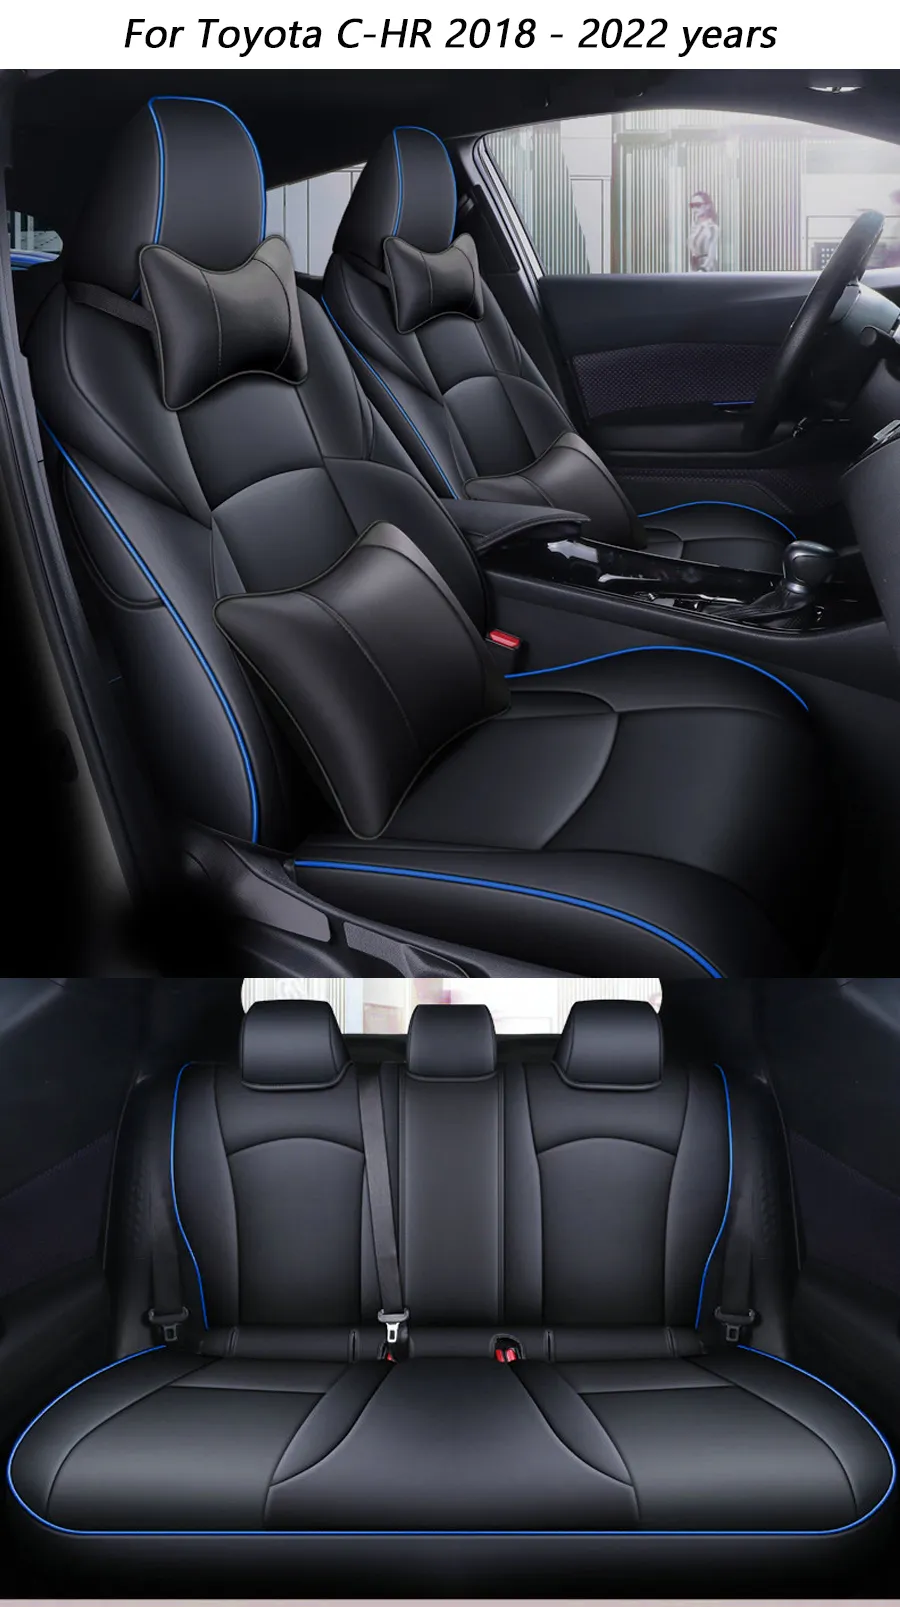 Waterproof Leatherette Seat Covers For 2019 2022 Toyota CHR Custom Fit  Luxury Design Full Set From Lshl520, $161.2